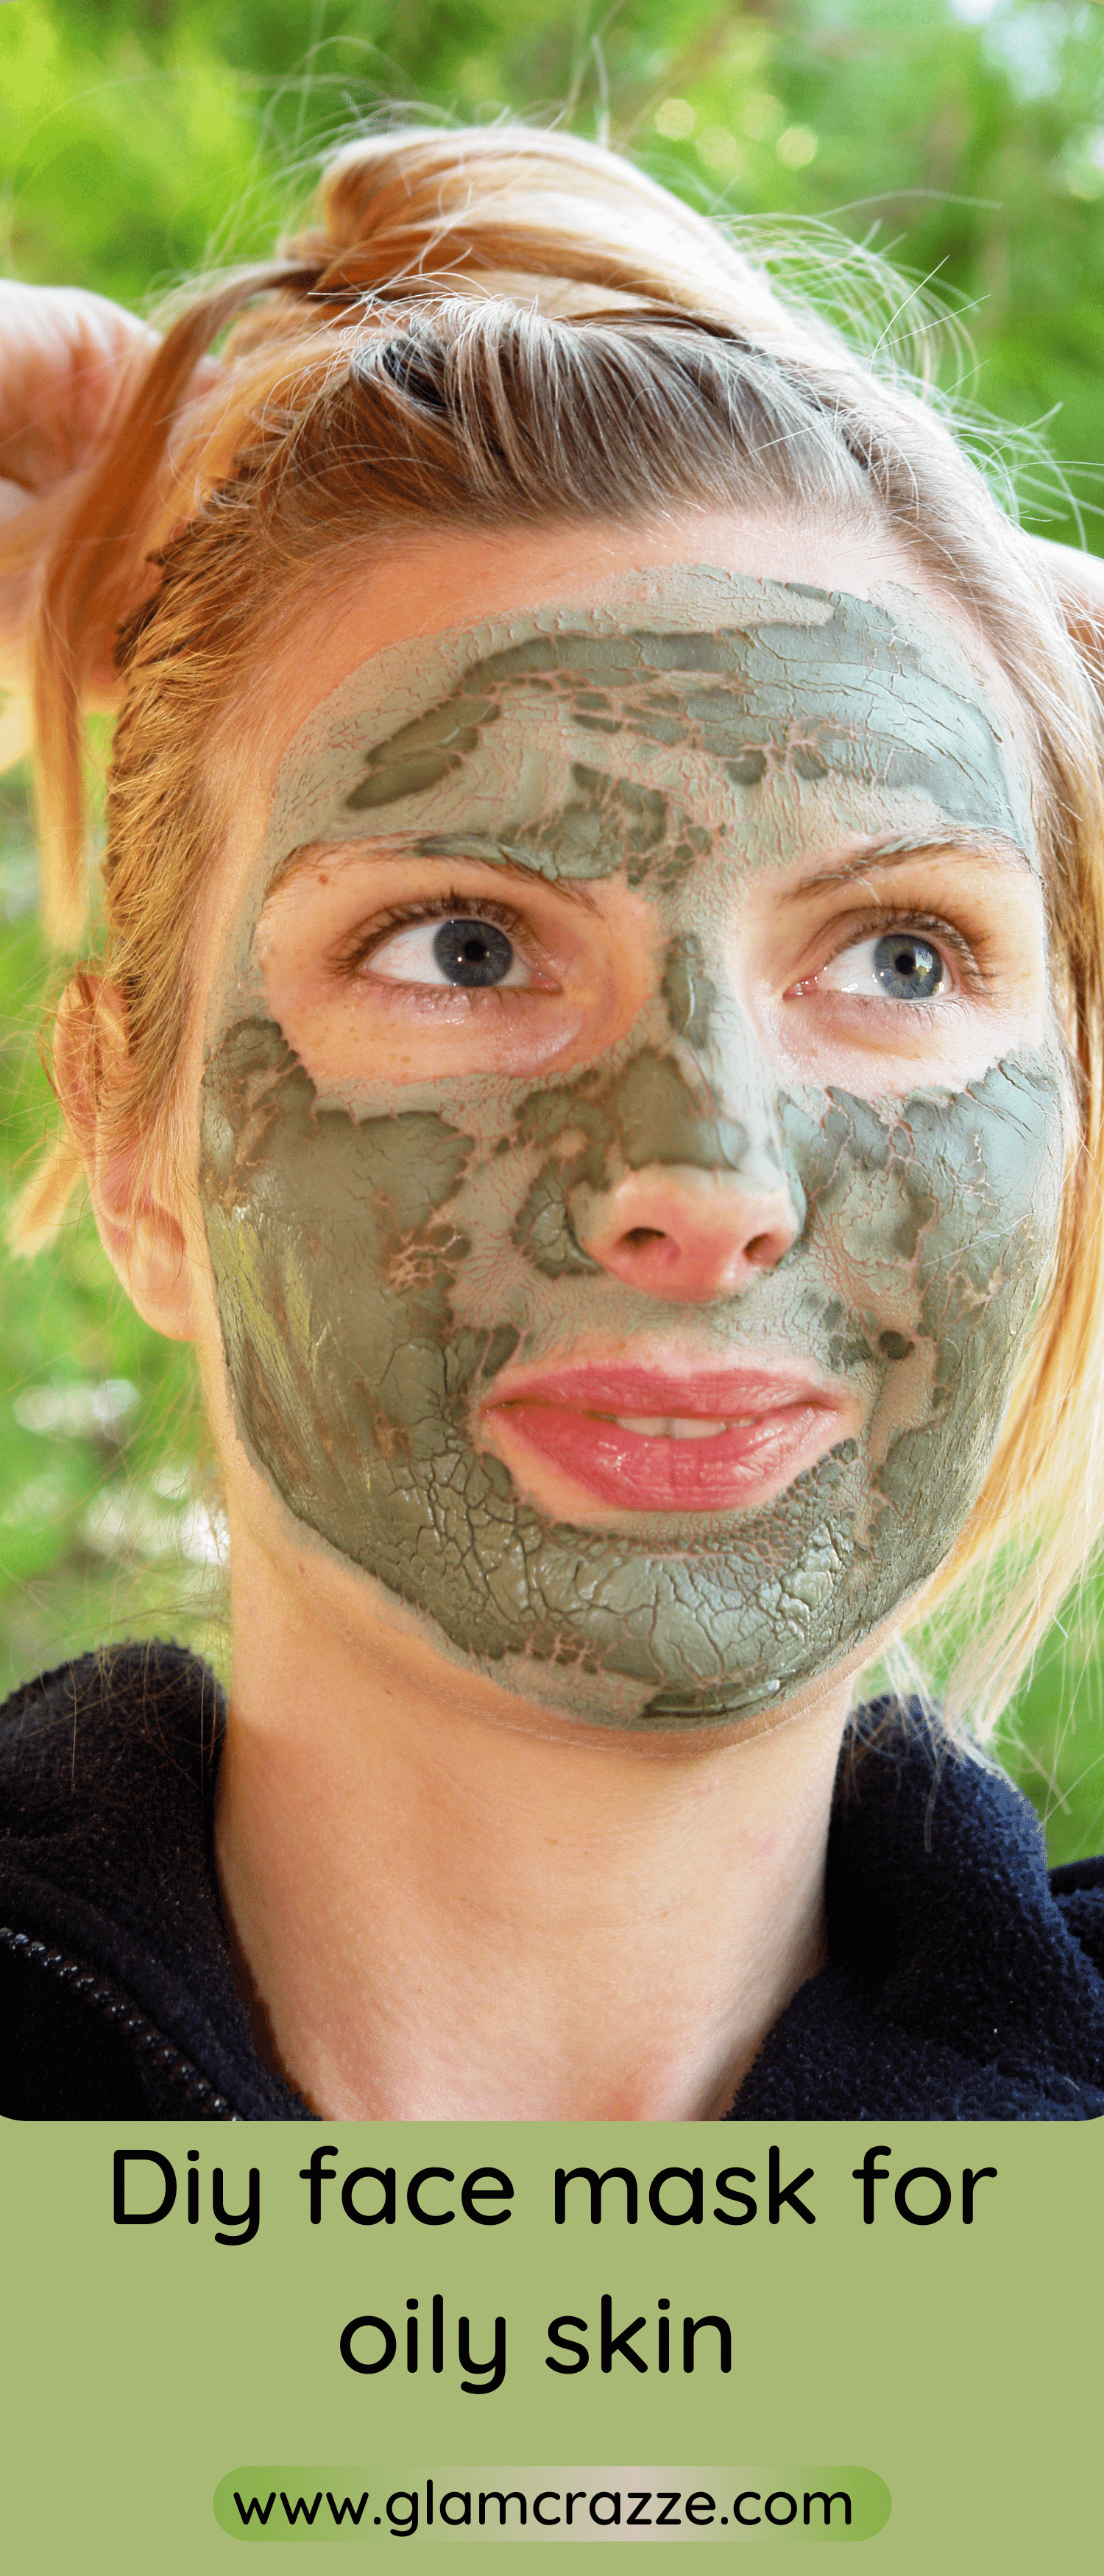 Try this Face mask for oily skin